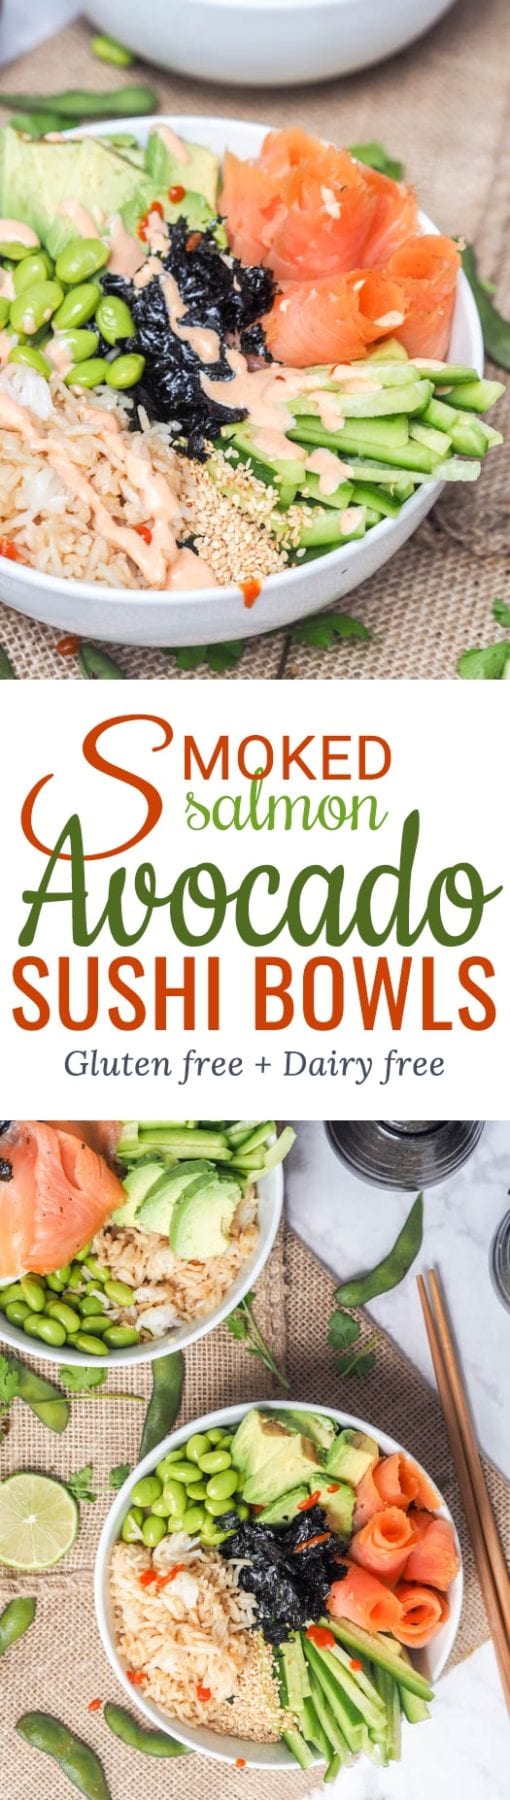 Sushi bowl with smoked salmon, avocado, cucumbers, edamame and rice makes for the perfect Japanese themed meal that is ready in under 30 minutes. All the flavors of a sushi roll but none of the fuss. Gluten Free and Dairy Free too.